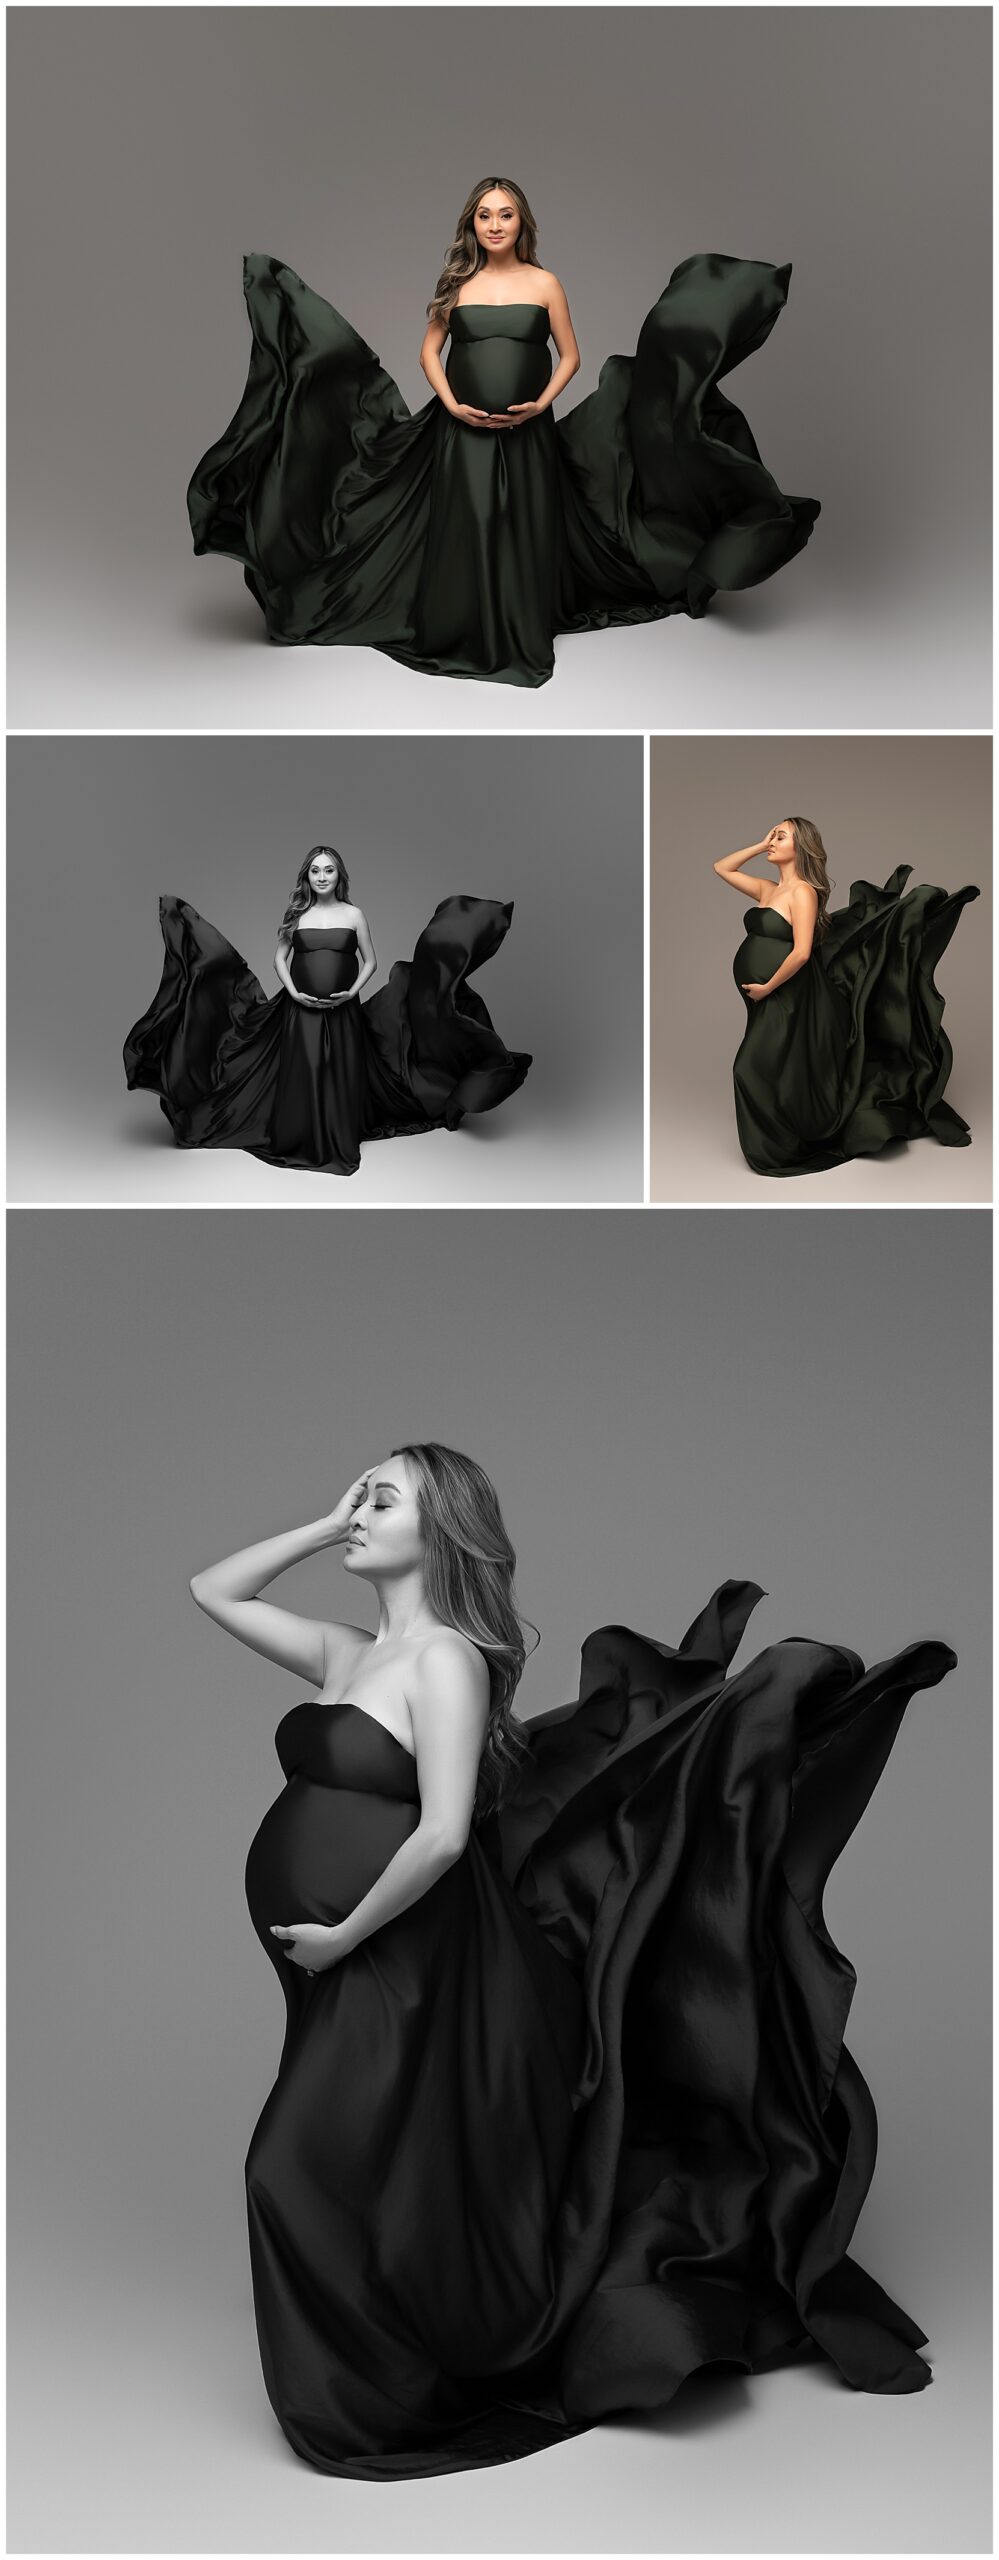 Austin photography montage featuring a pregnant woman in a dark green, satin maternity gown in various maternity poses